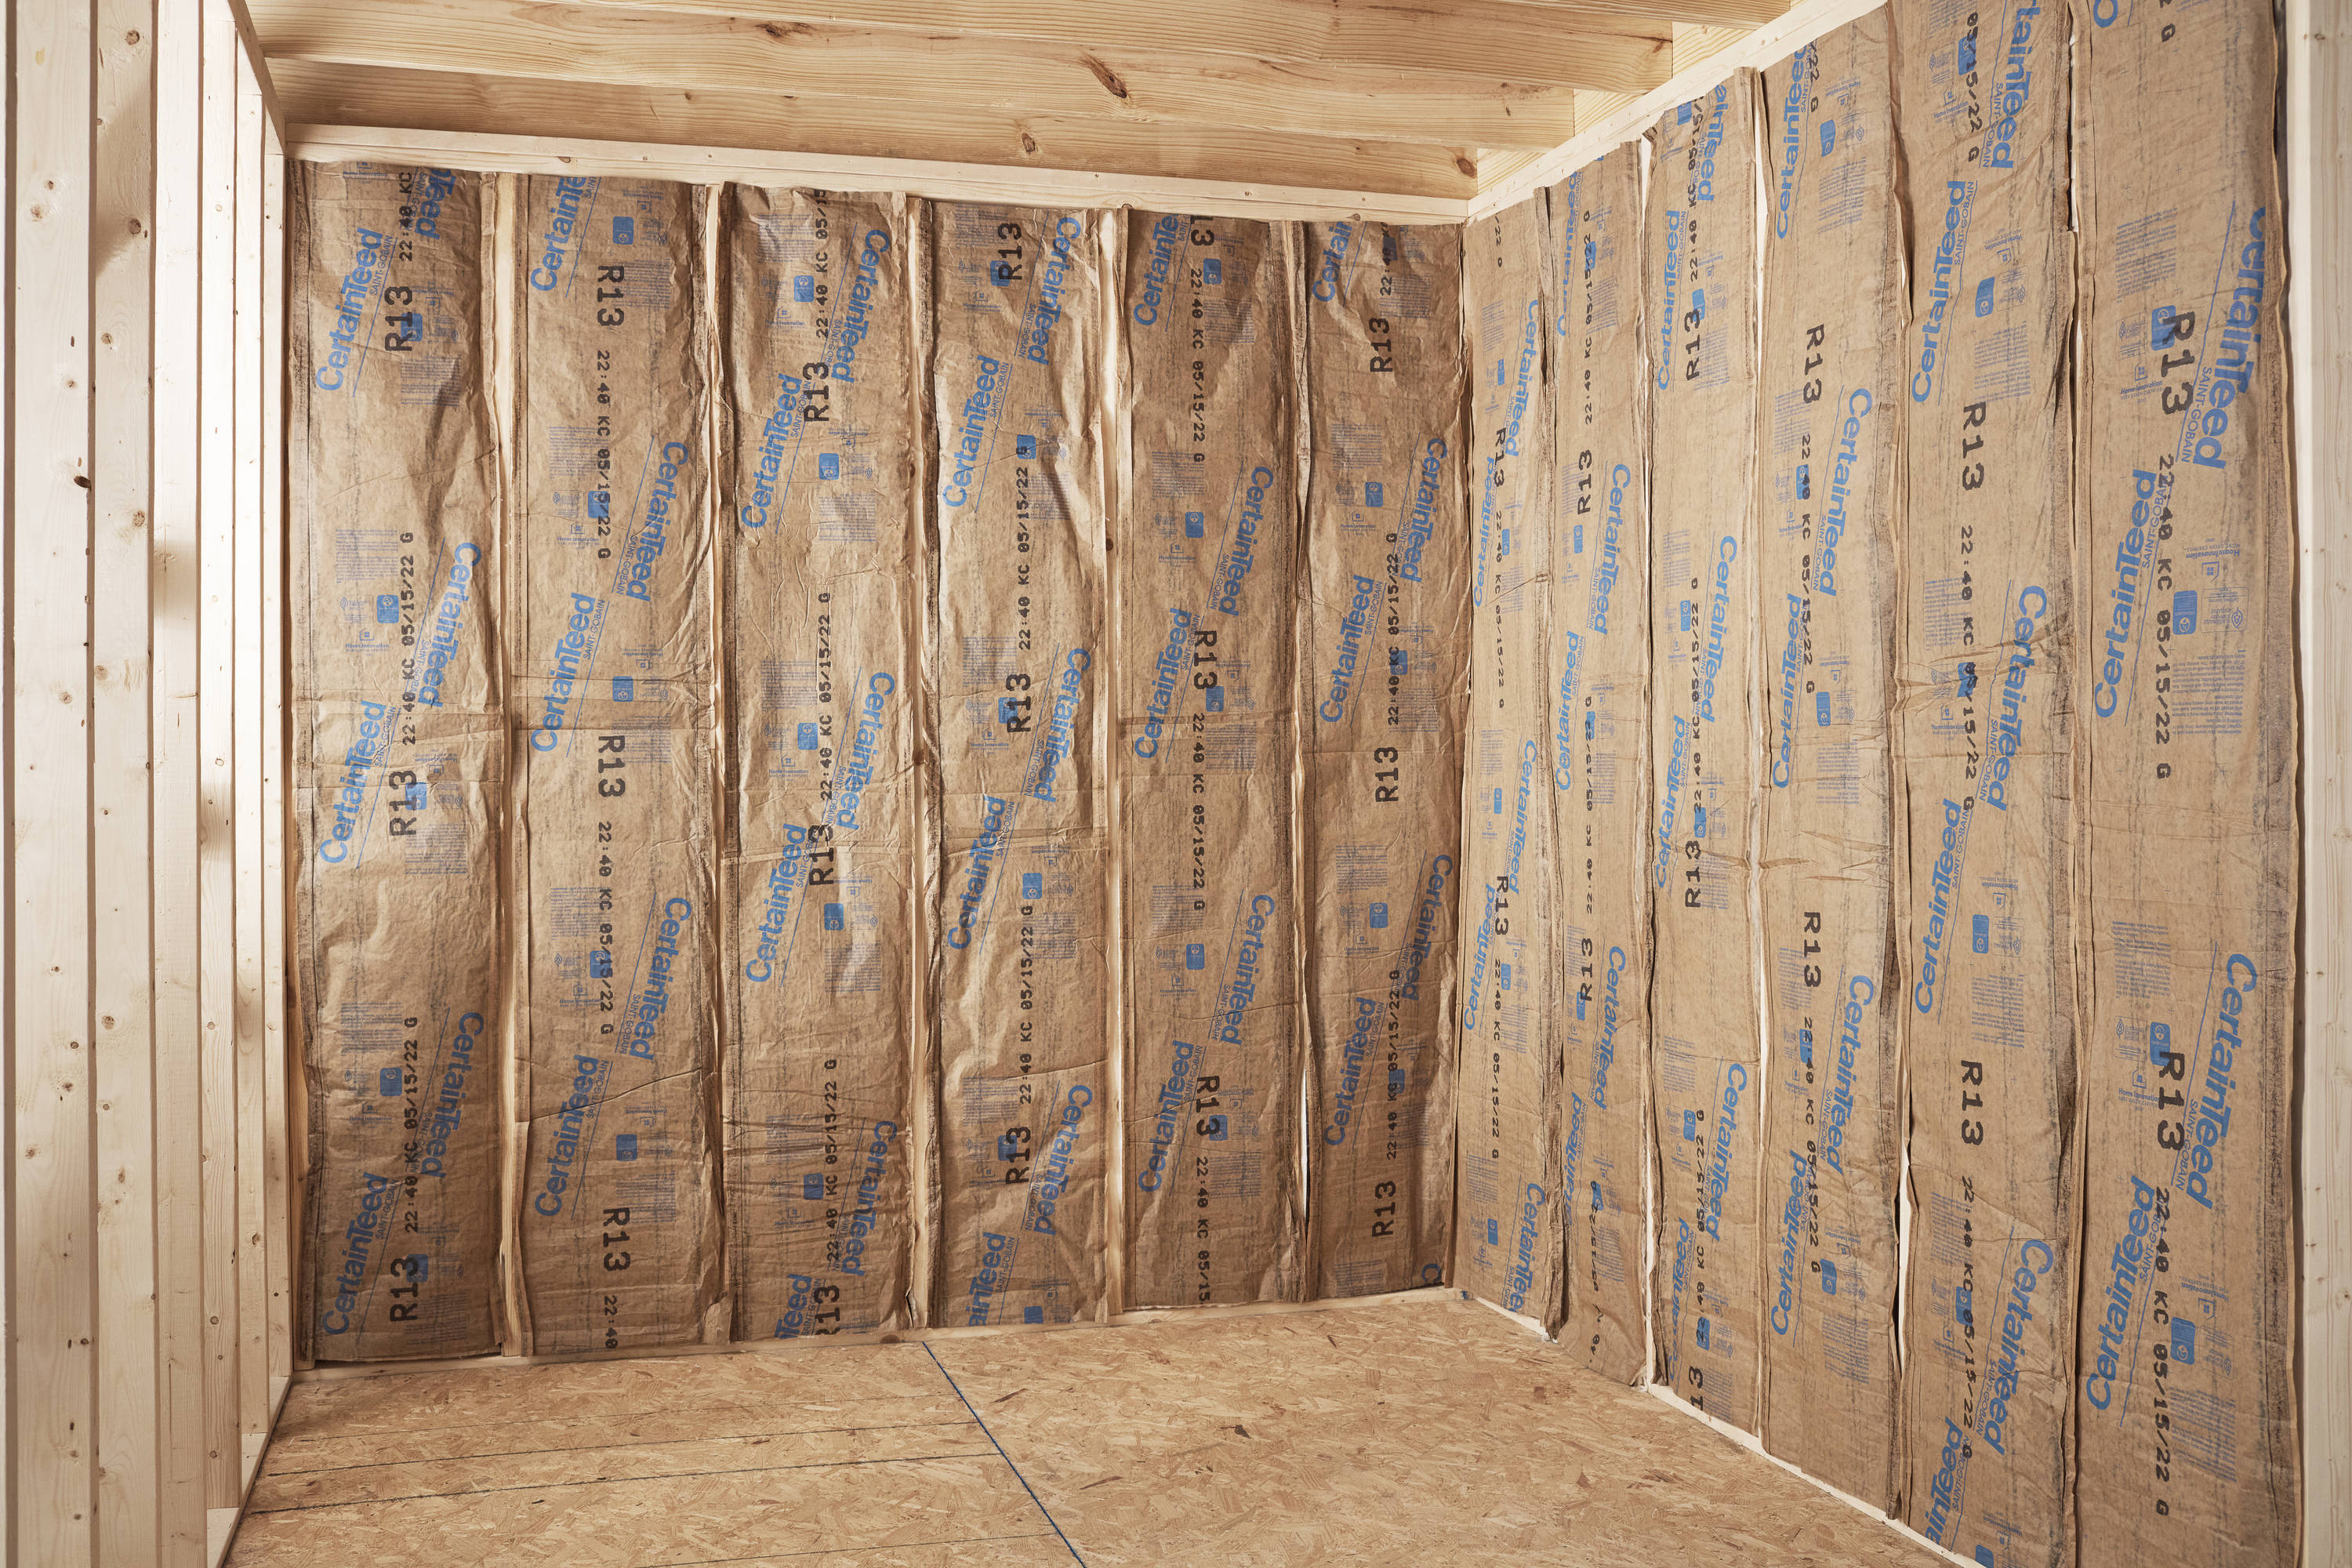 Radiant Trusted Manufacturers – Rockwool - Radiant Drywall & Insulation